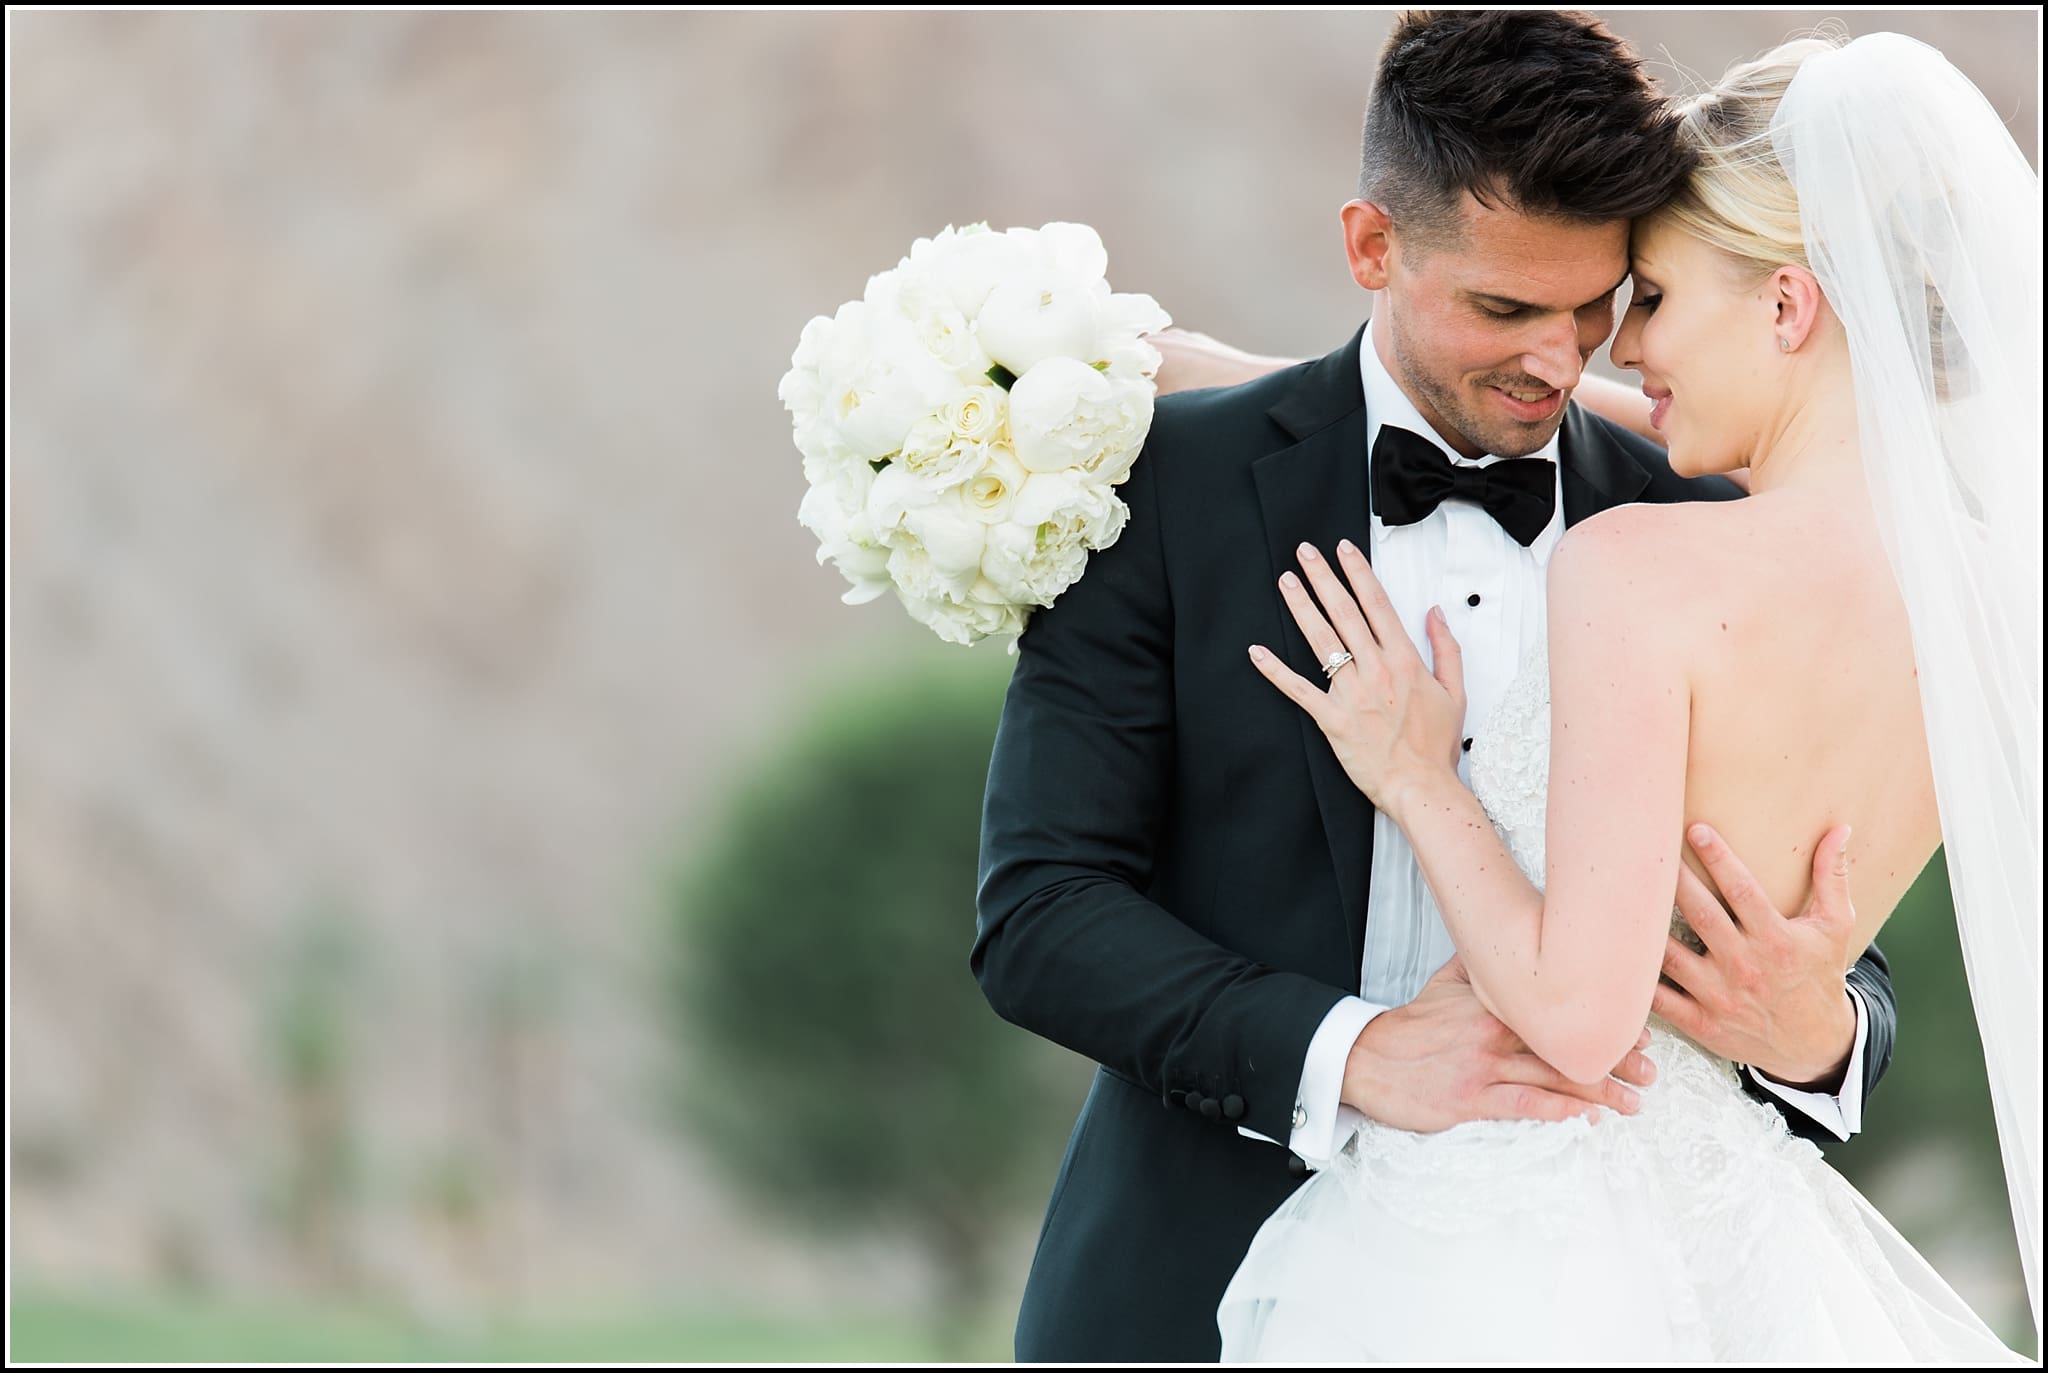  favorite wedding images 2016, wedding photos from 2016, our favorite wedding photos, la quinta resort wedding, waldorf wedding, la quinta wedding photographer, mary case florist